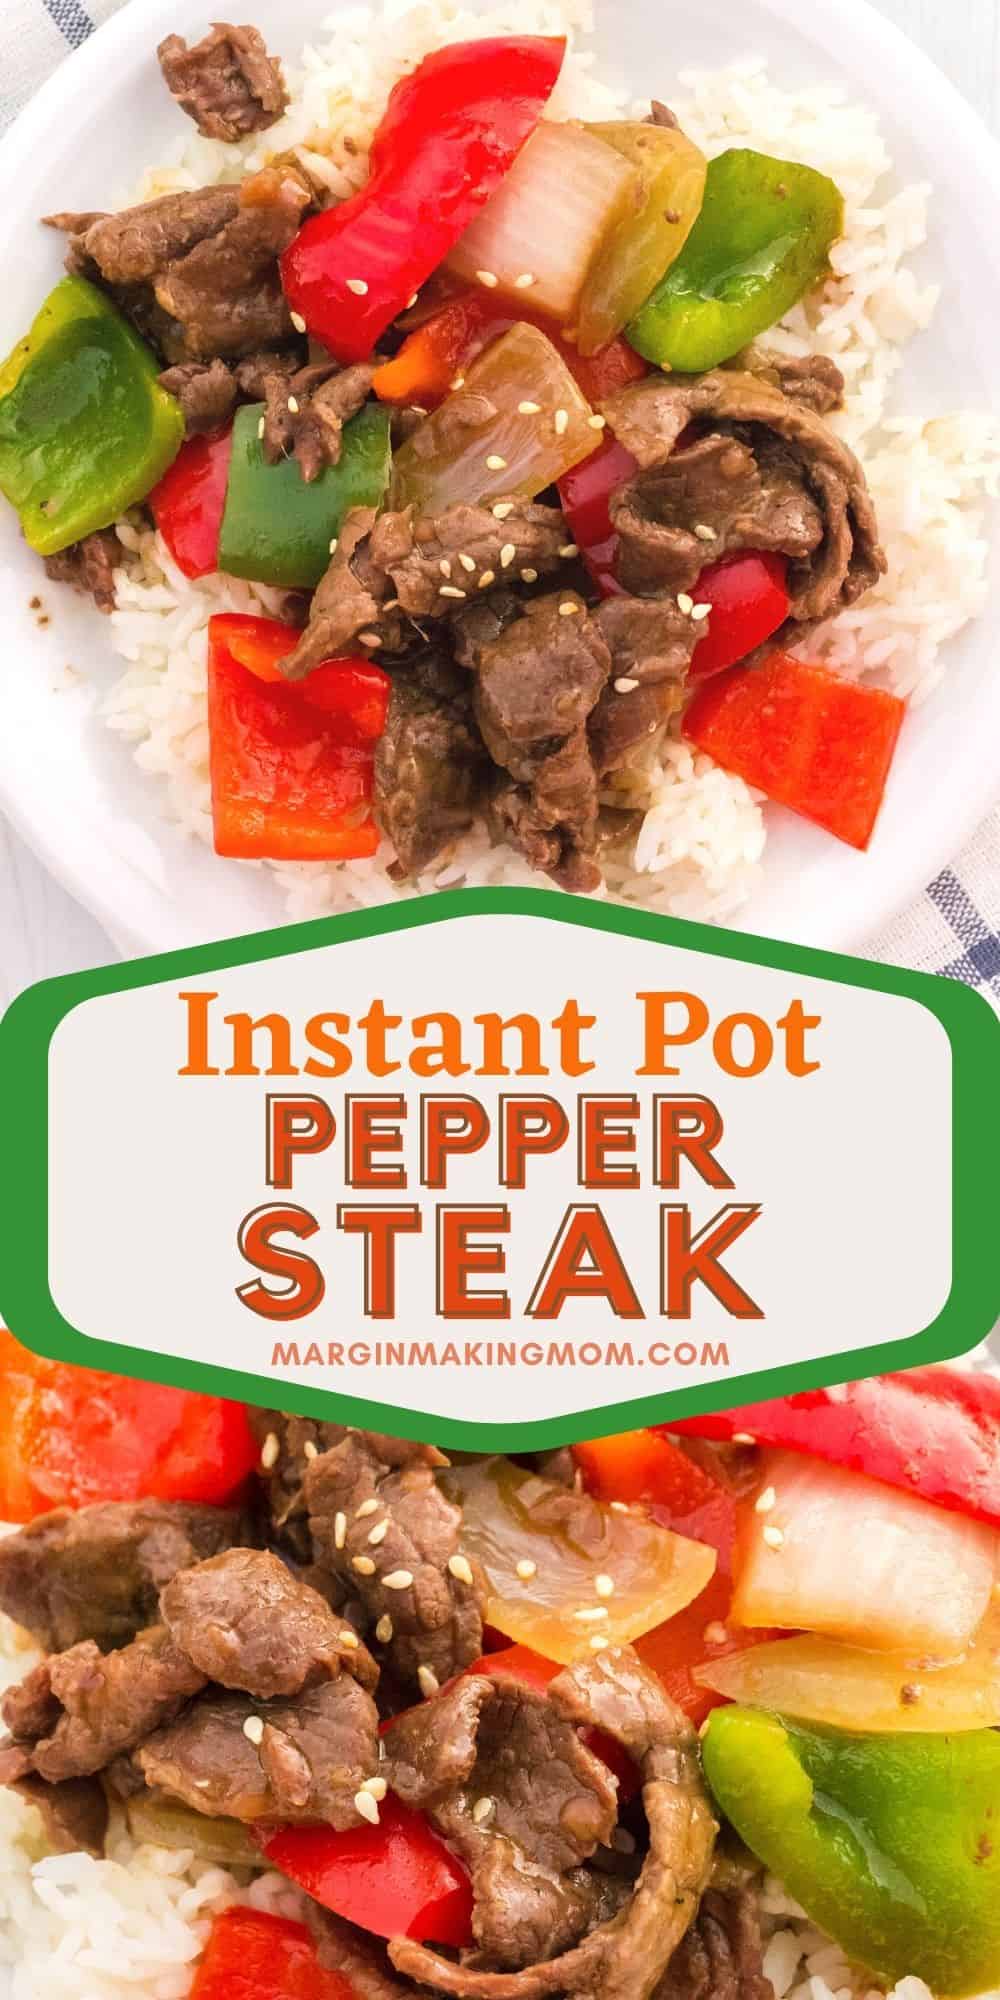 collage image featuring two photos of Instant Pot pepper steak--one is an overhead view and one is a close-up view